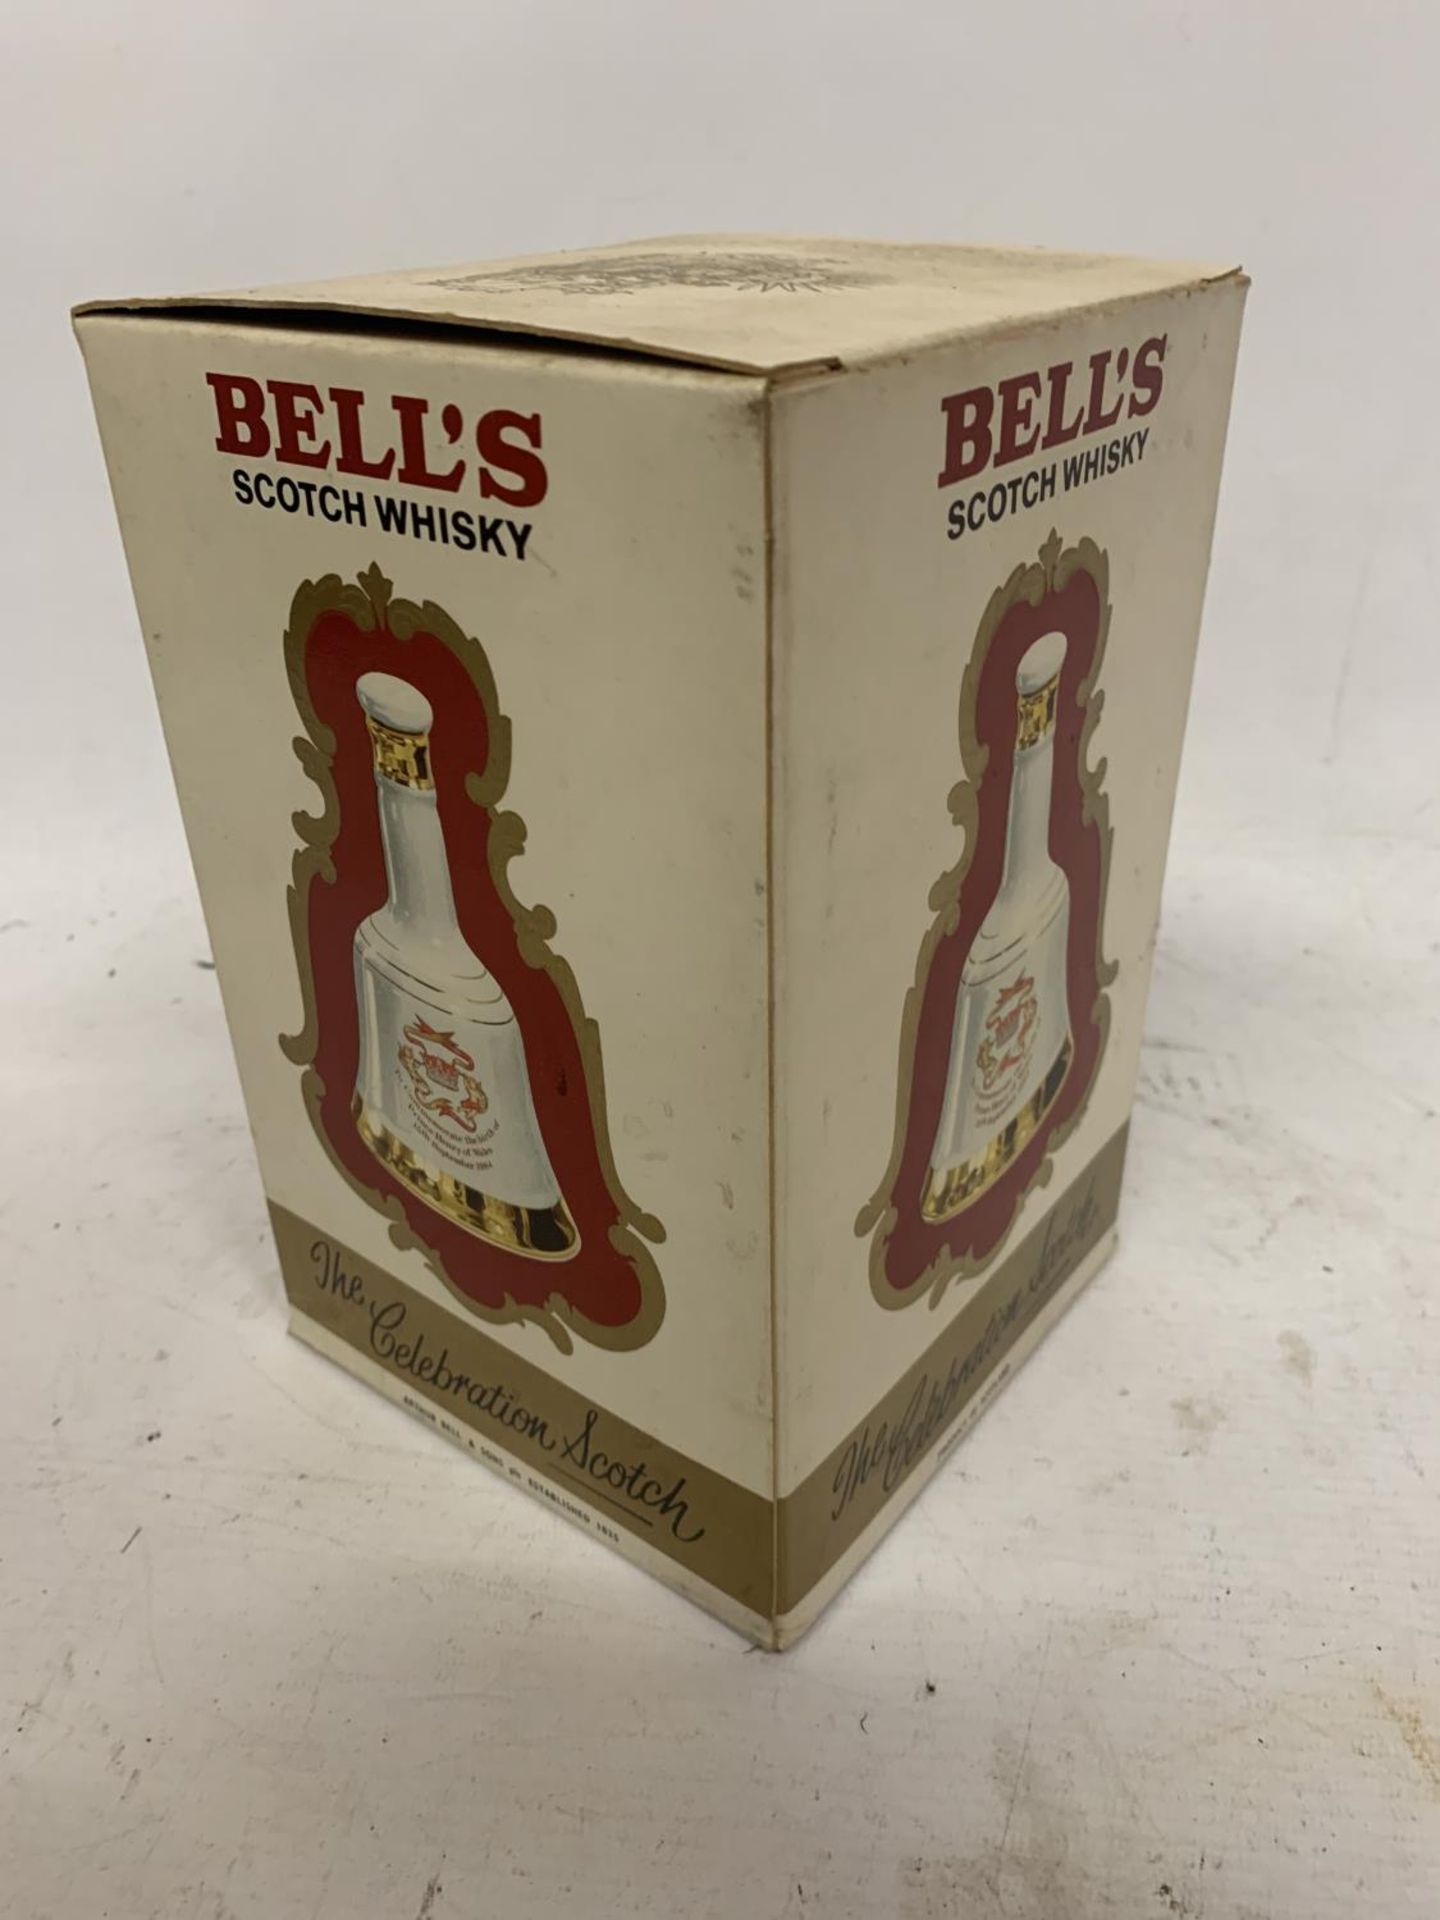 A BOXED 50CL BOTTLE - BELLS PRINCE HENRY OF WALES 1984 SCOTCH WHISKY - Image 2 of 2